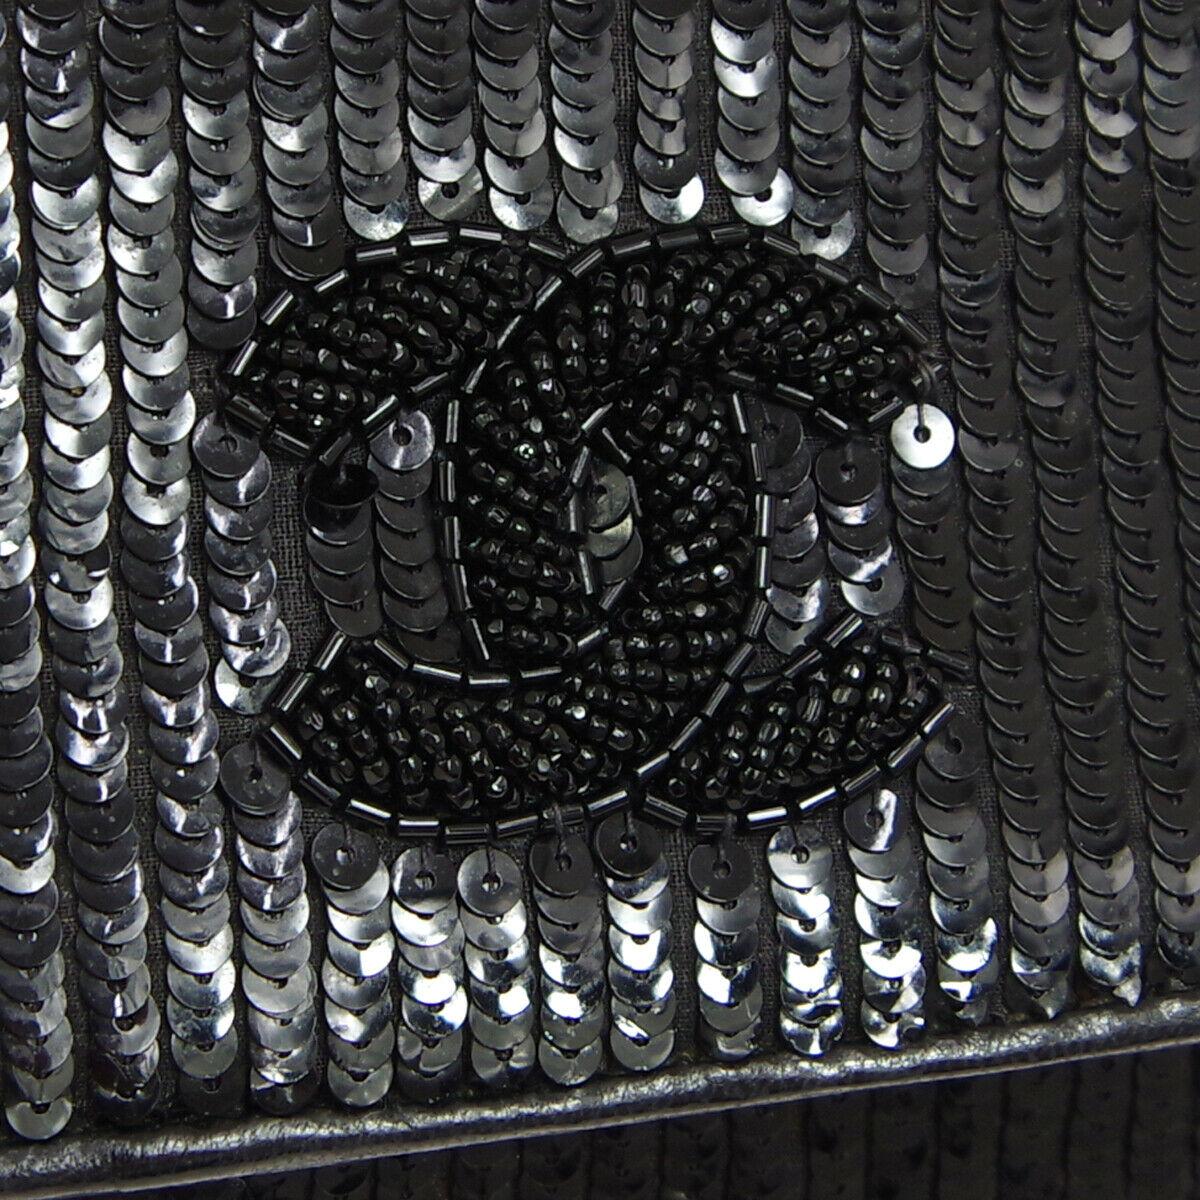 Chanel Black Sequin Beaded Fabric 2 in 1 Evening Clutch Shoulder Flap Bag 

Sequin
Bead
Fabric 
Leather lining
Snap closure
Made in Italy
Date code present 
Made in France 
Measures 6.25